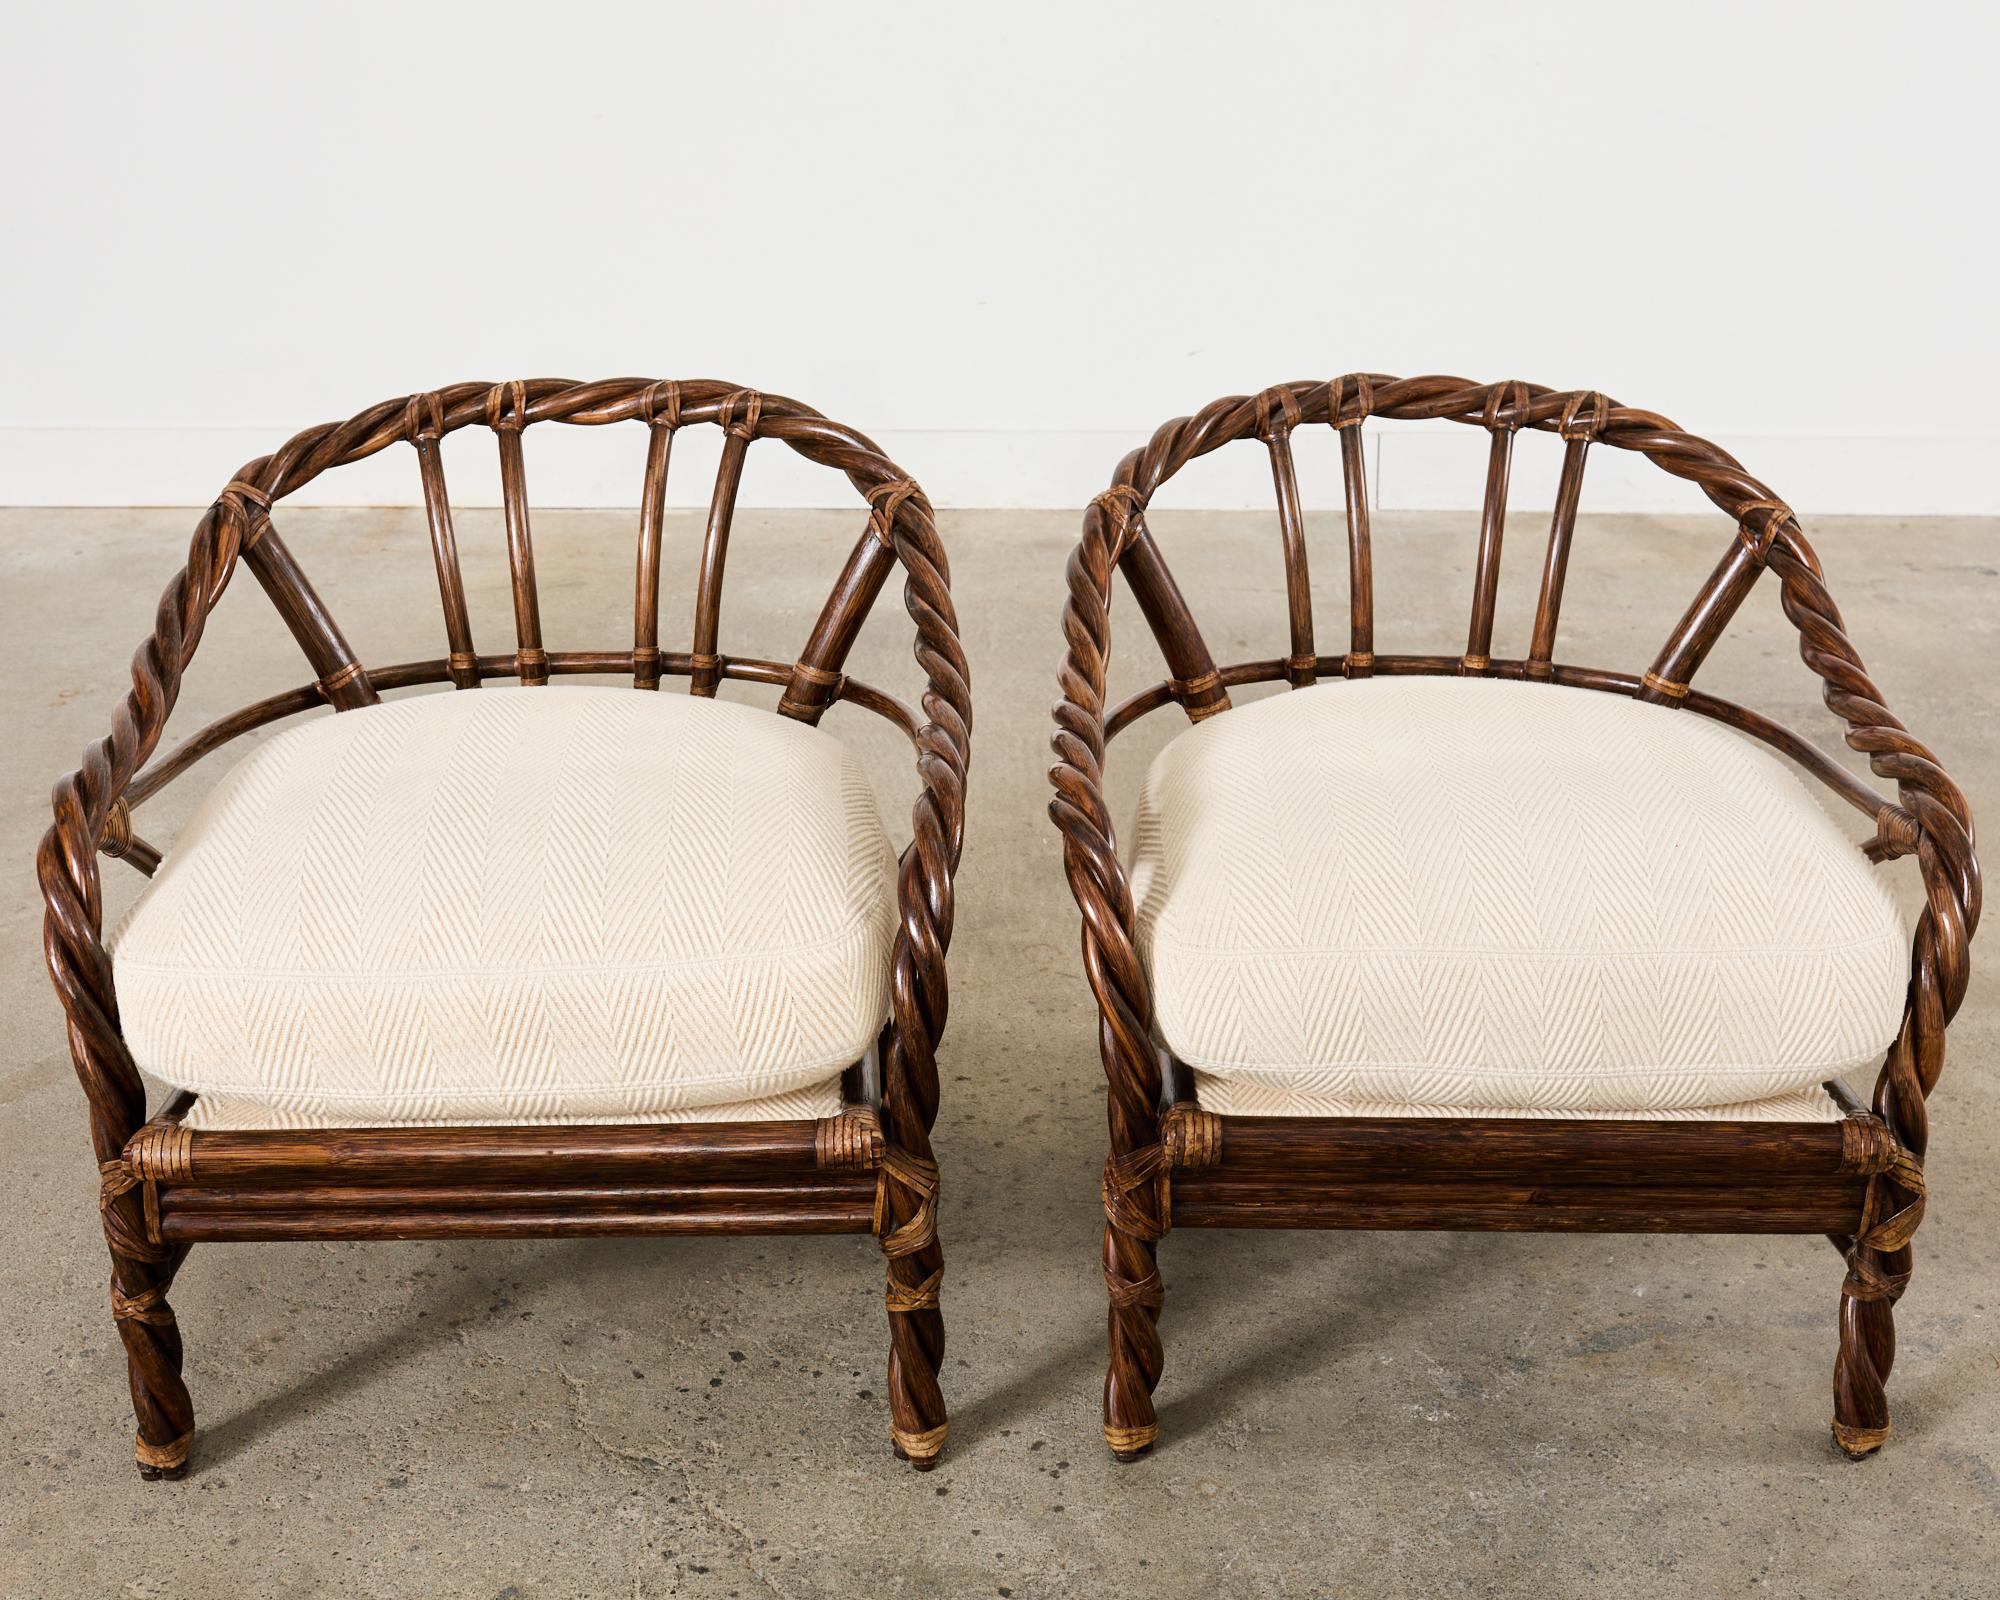 Pair of McGuire Organic Modern Twisted Rattan Lounge Chairs  In Good Condition For Sale In Rio Vista, CA